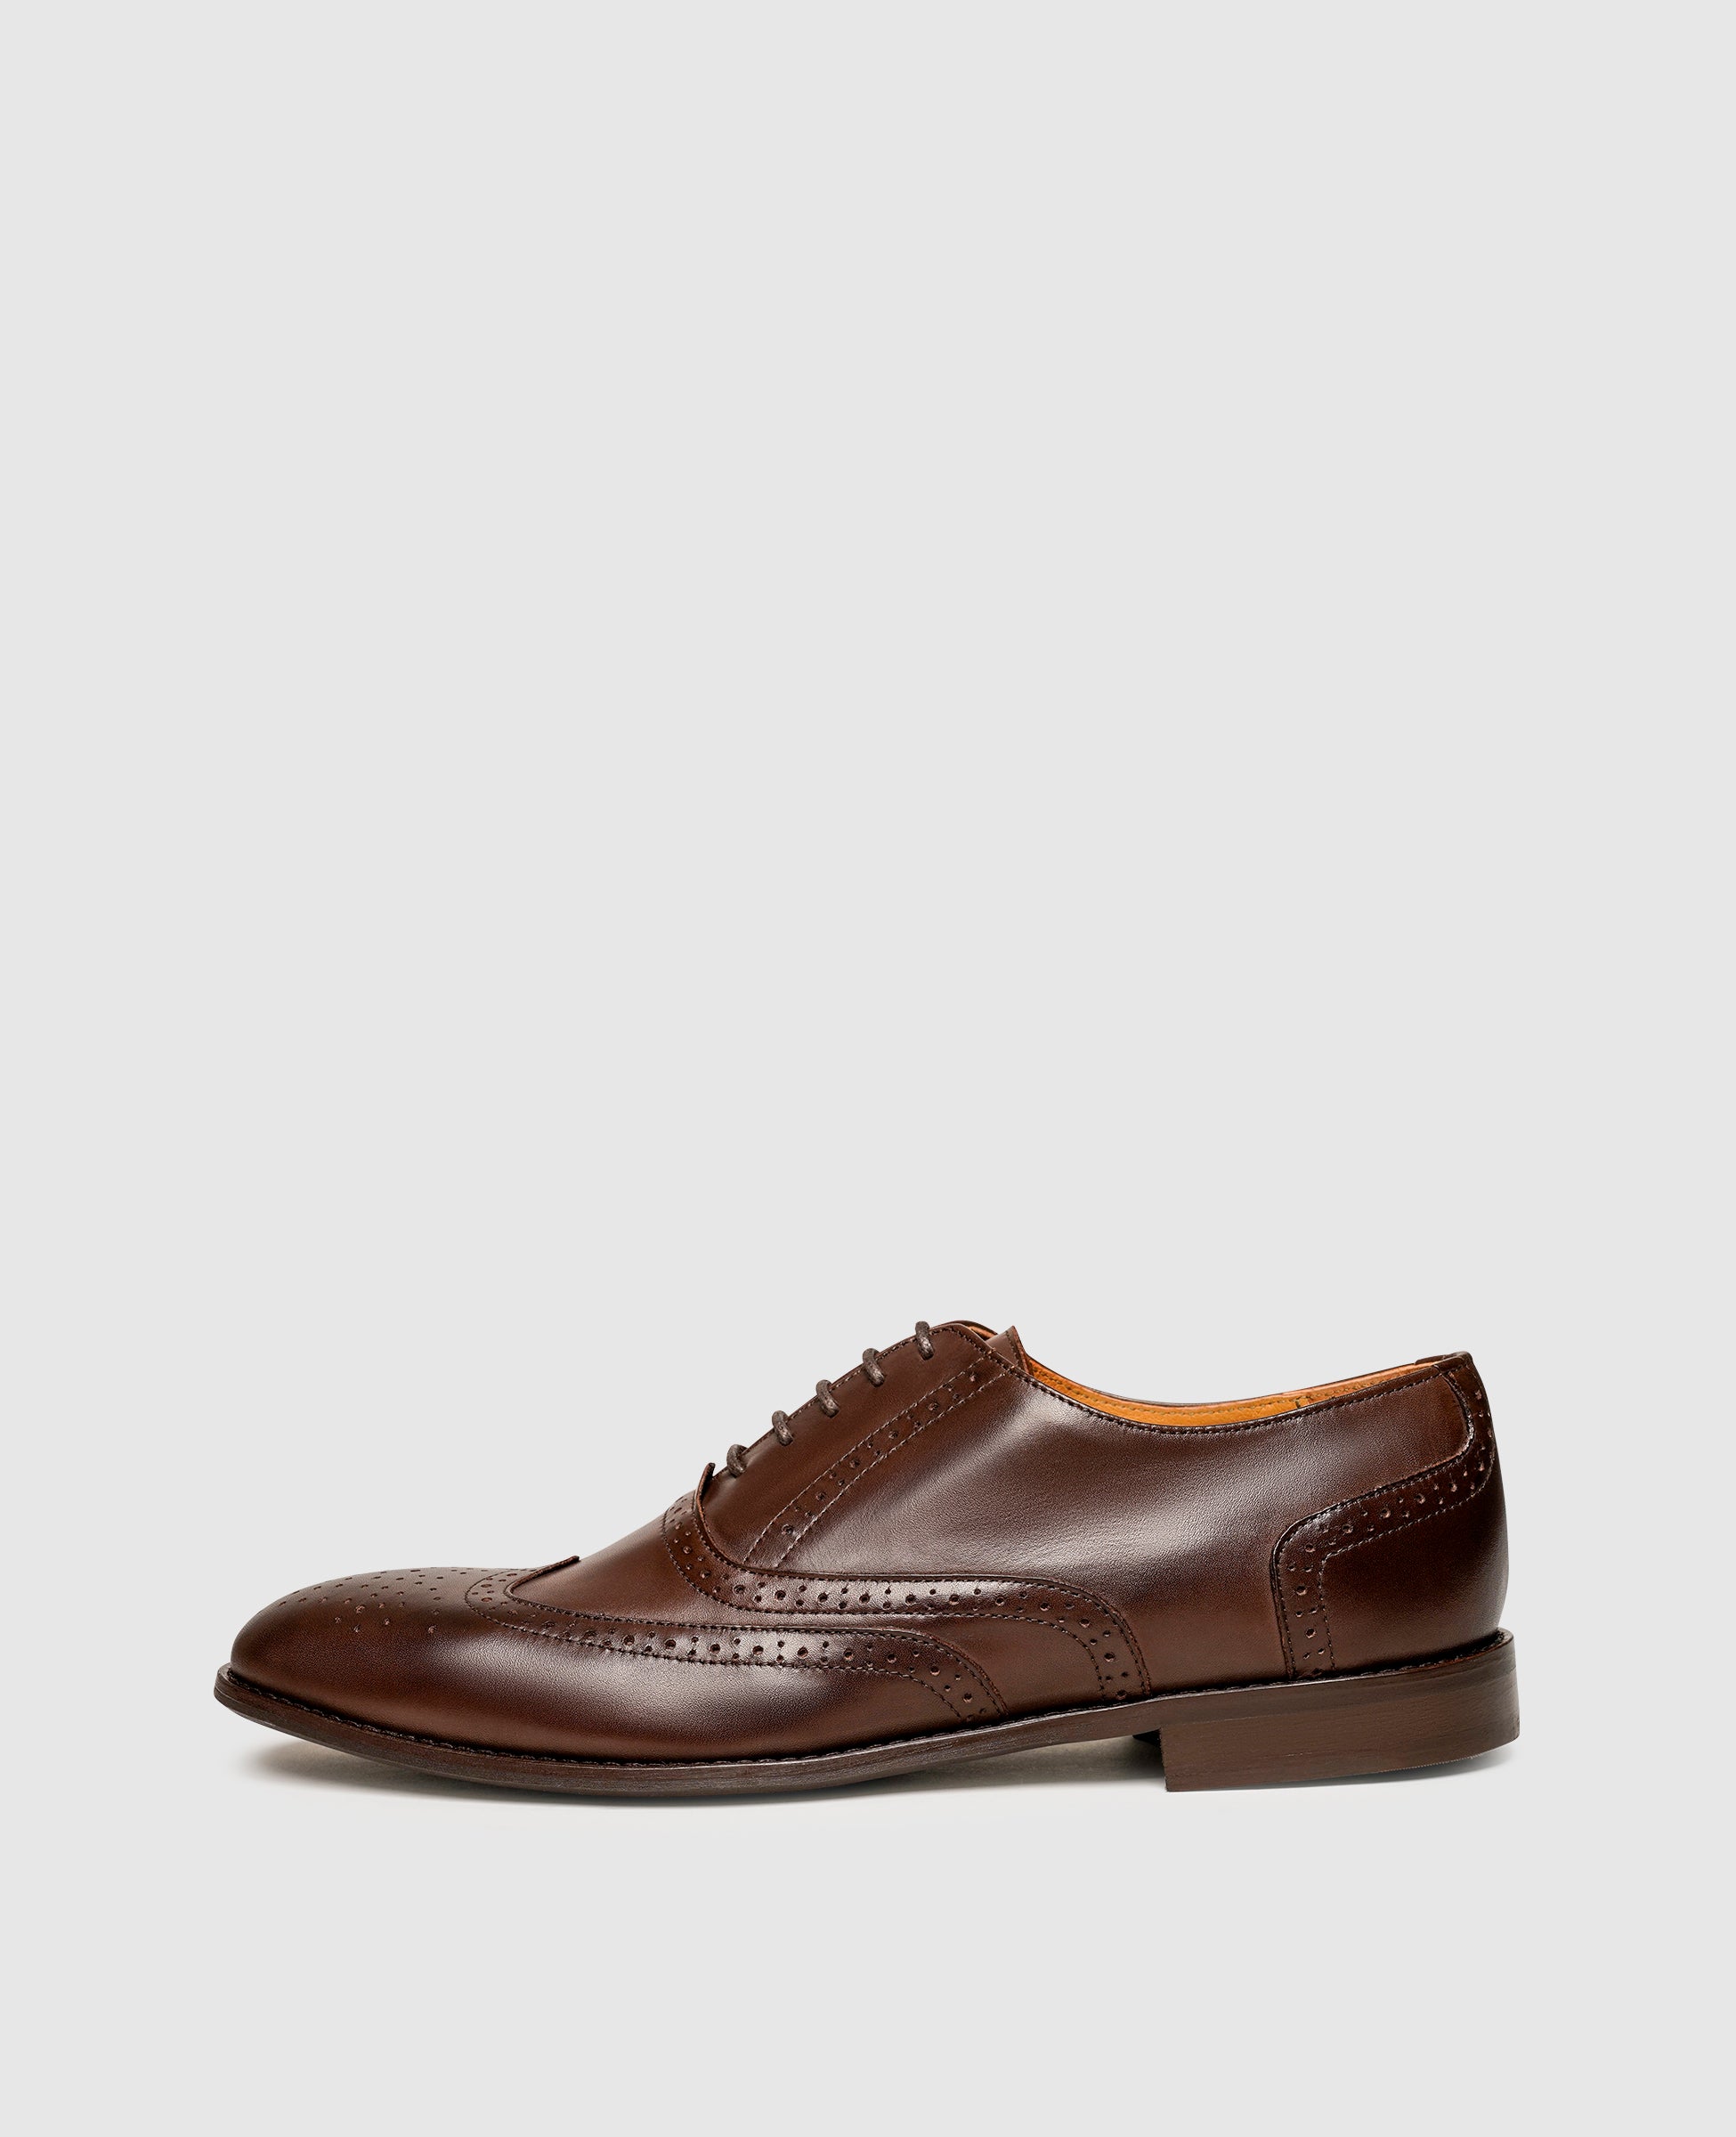 Flexible Full-Brogue Oxford in Smooth Leather | Henry Stevens | Shoepassion